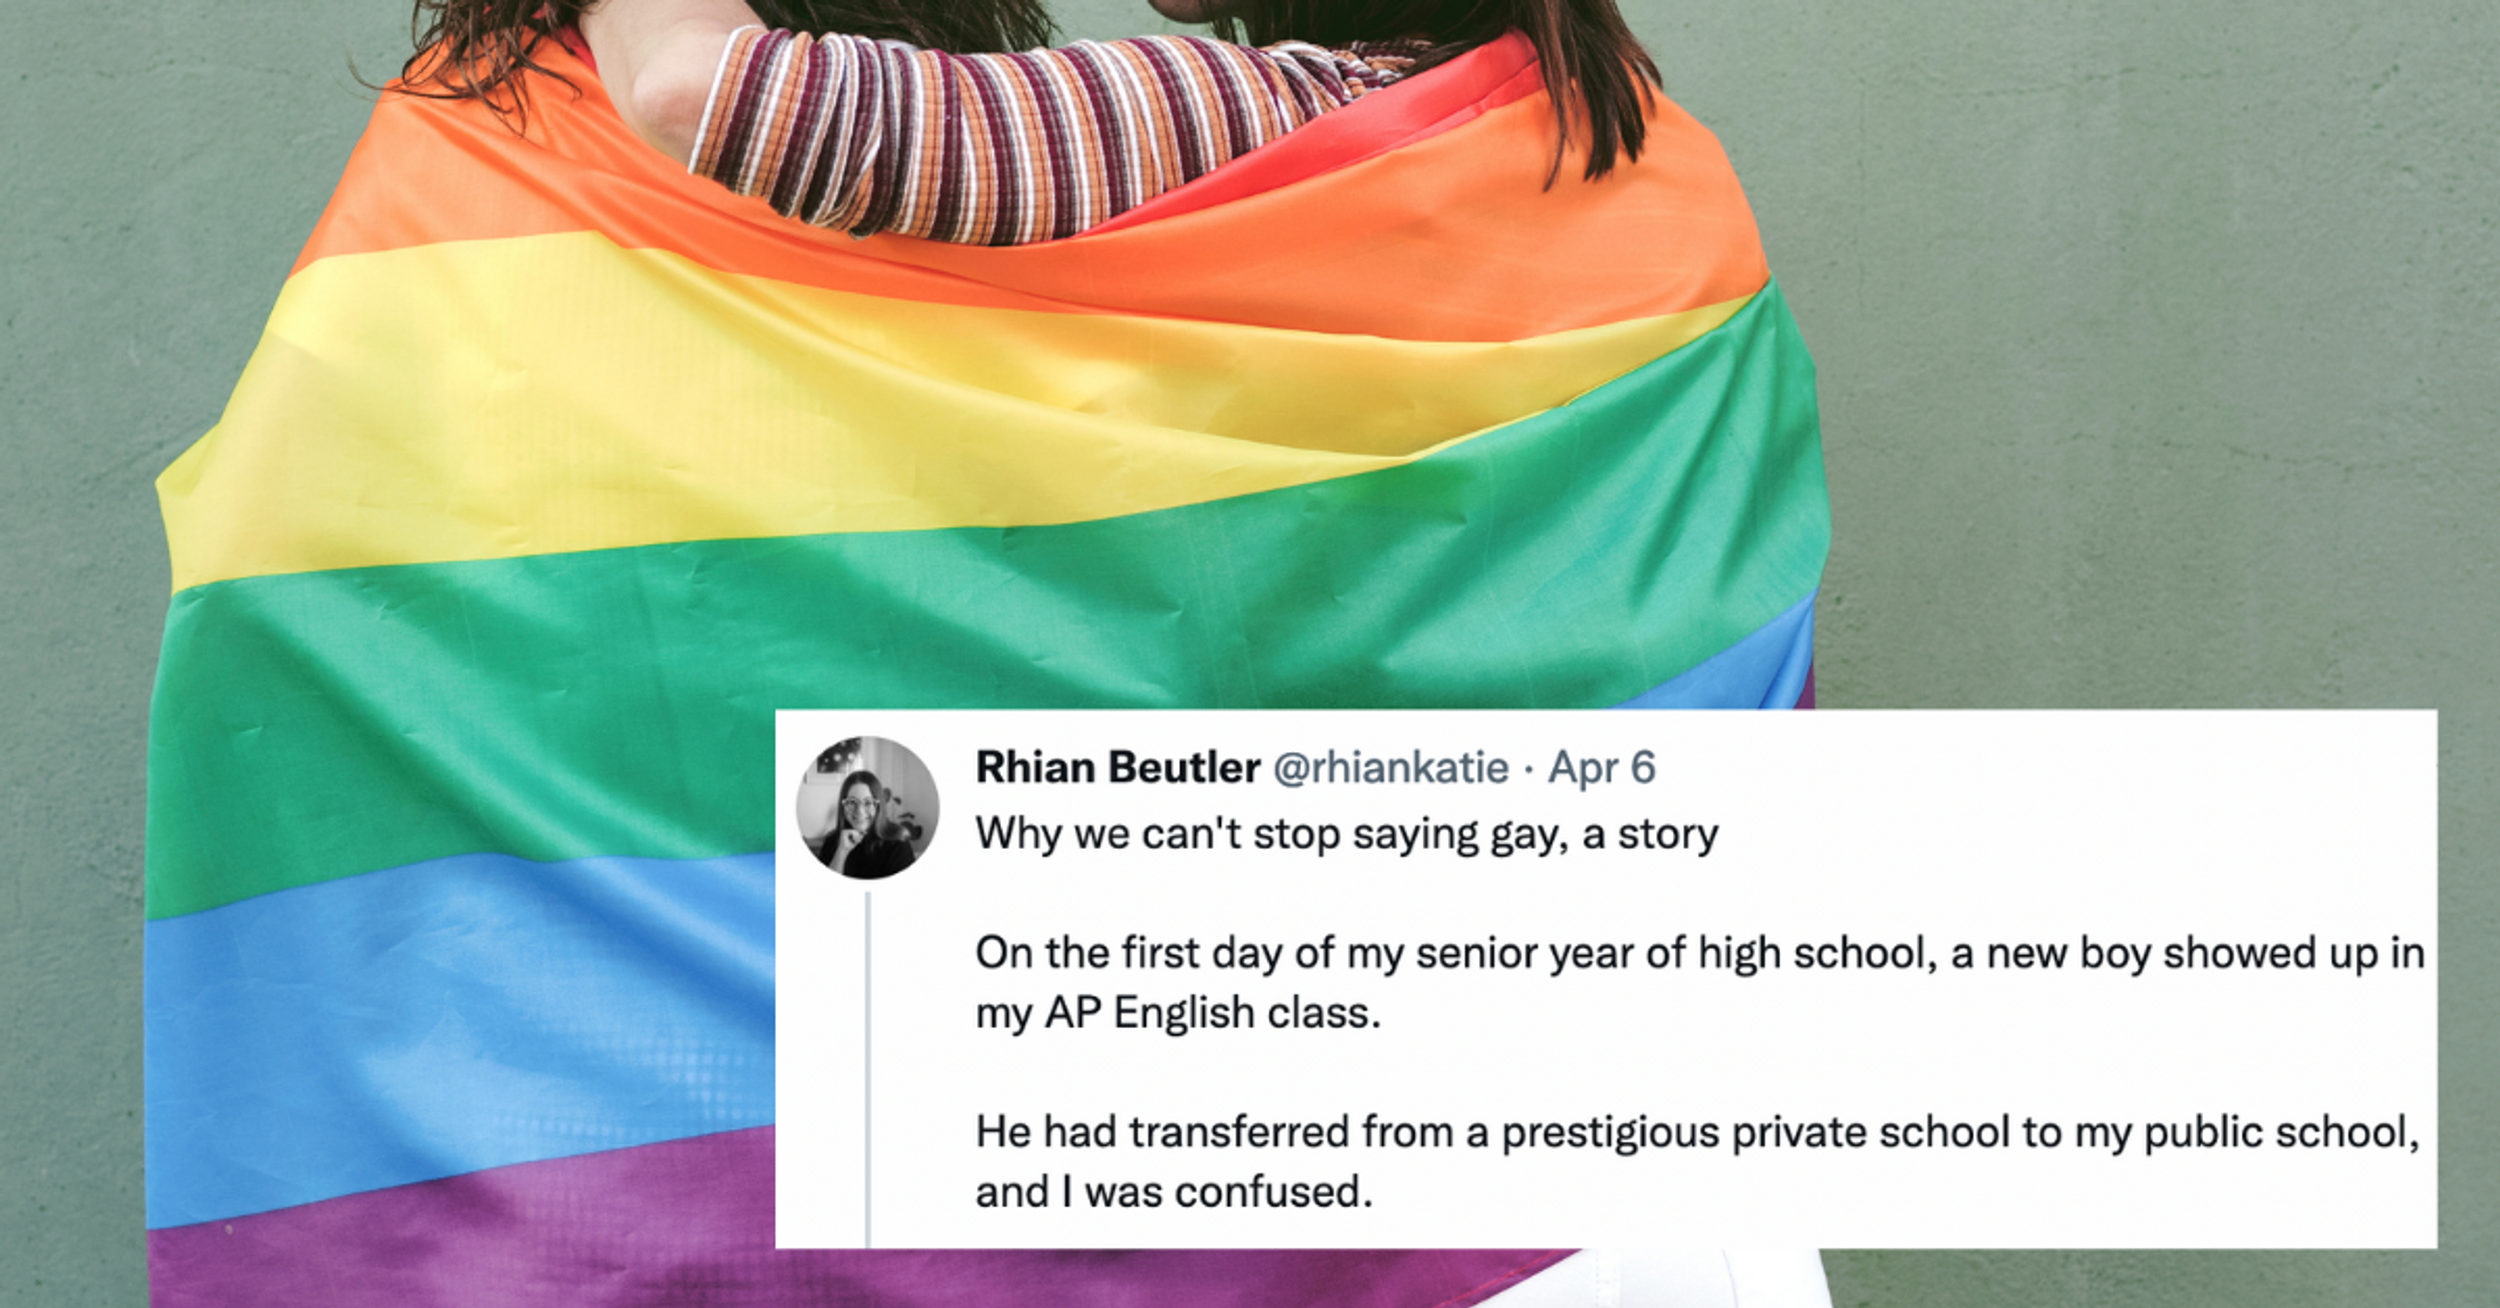 Woman Pens Powerful And Personal Viral Twitter Thread About Why We 'Can't Stop Saying Gay'